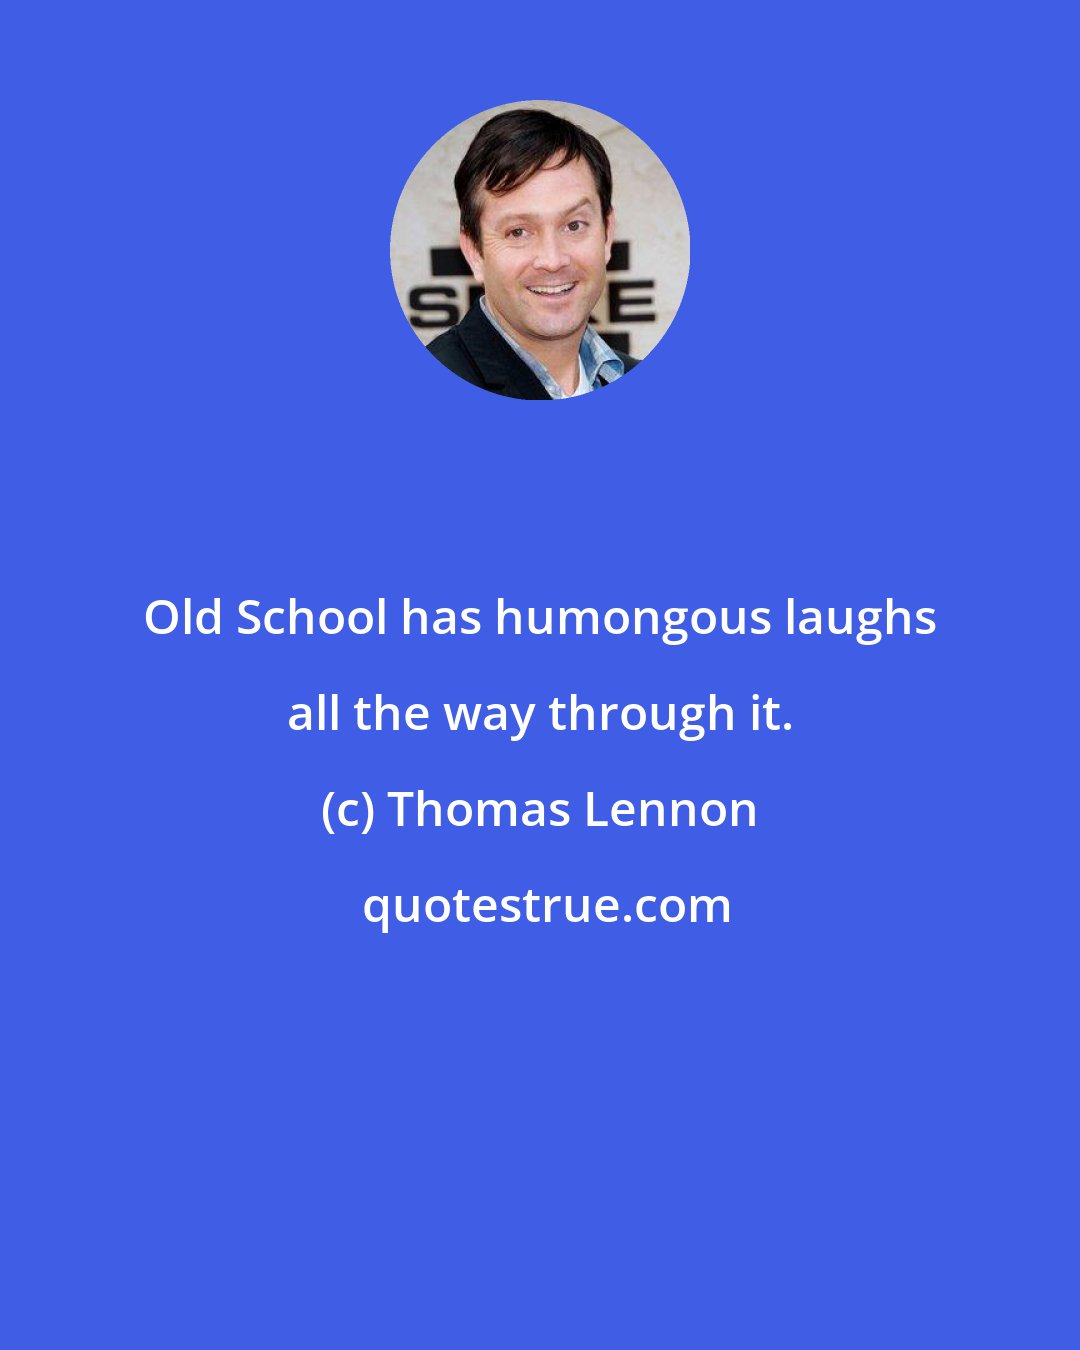 Thomas Lennon: Old School has humongous laughs all the way through it.